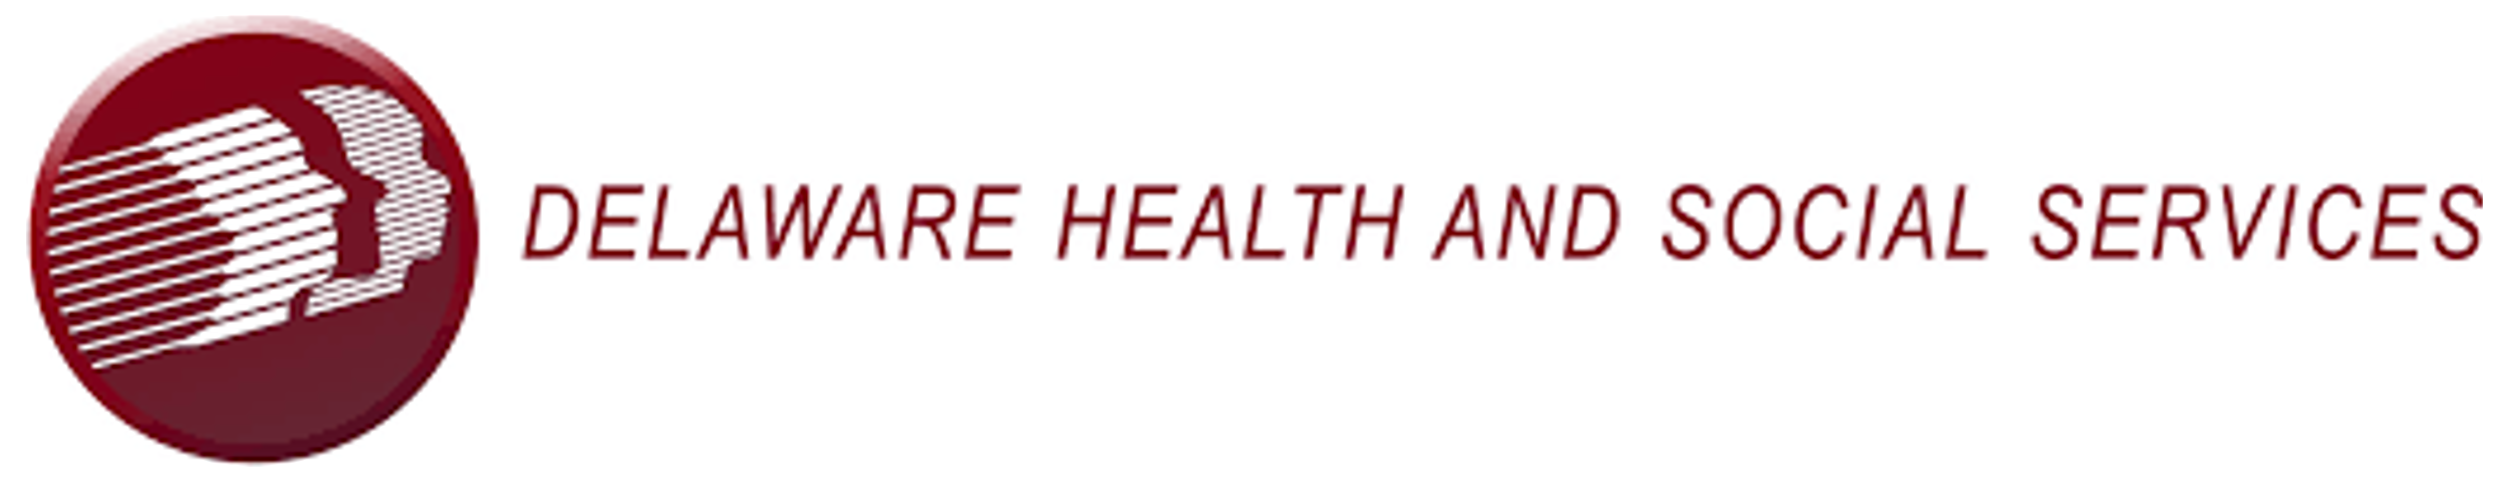 Delaware health and Social Services logo